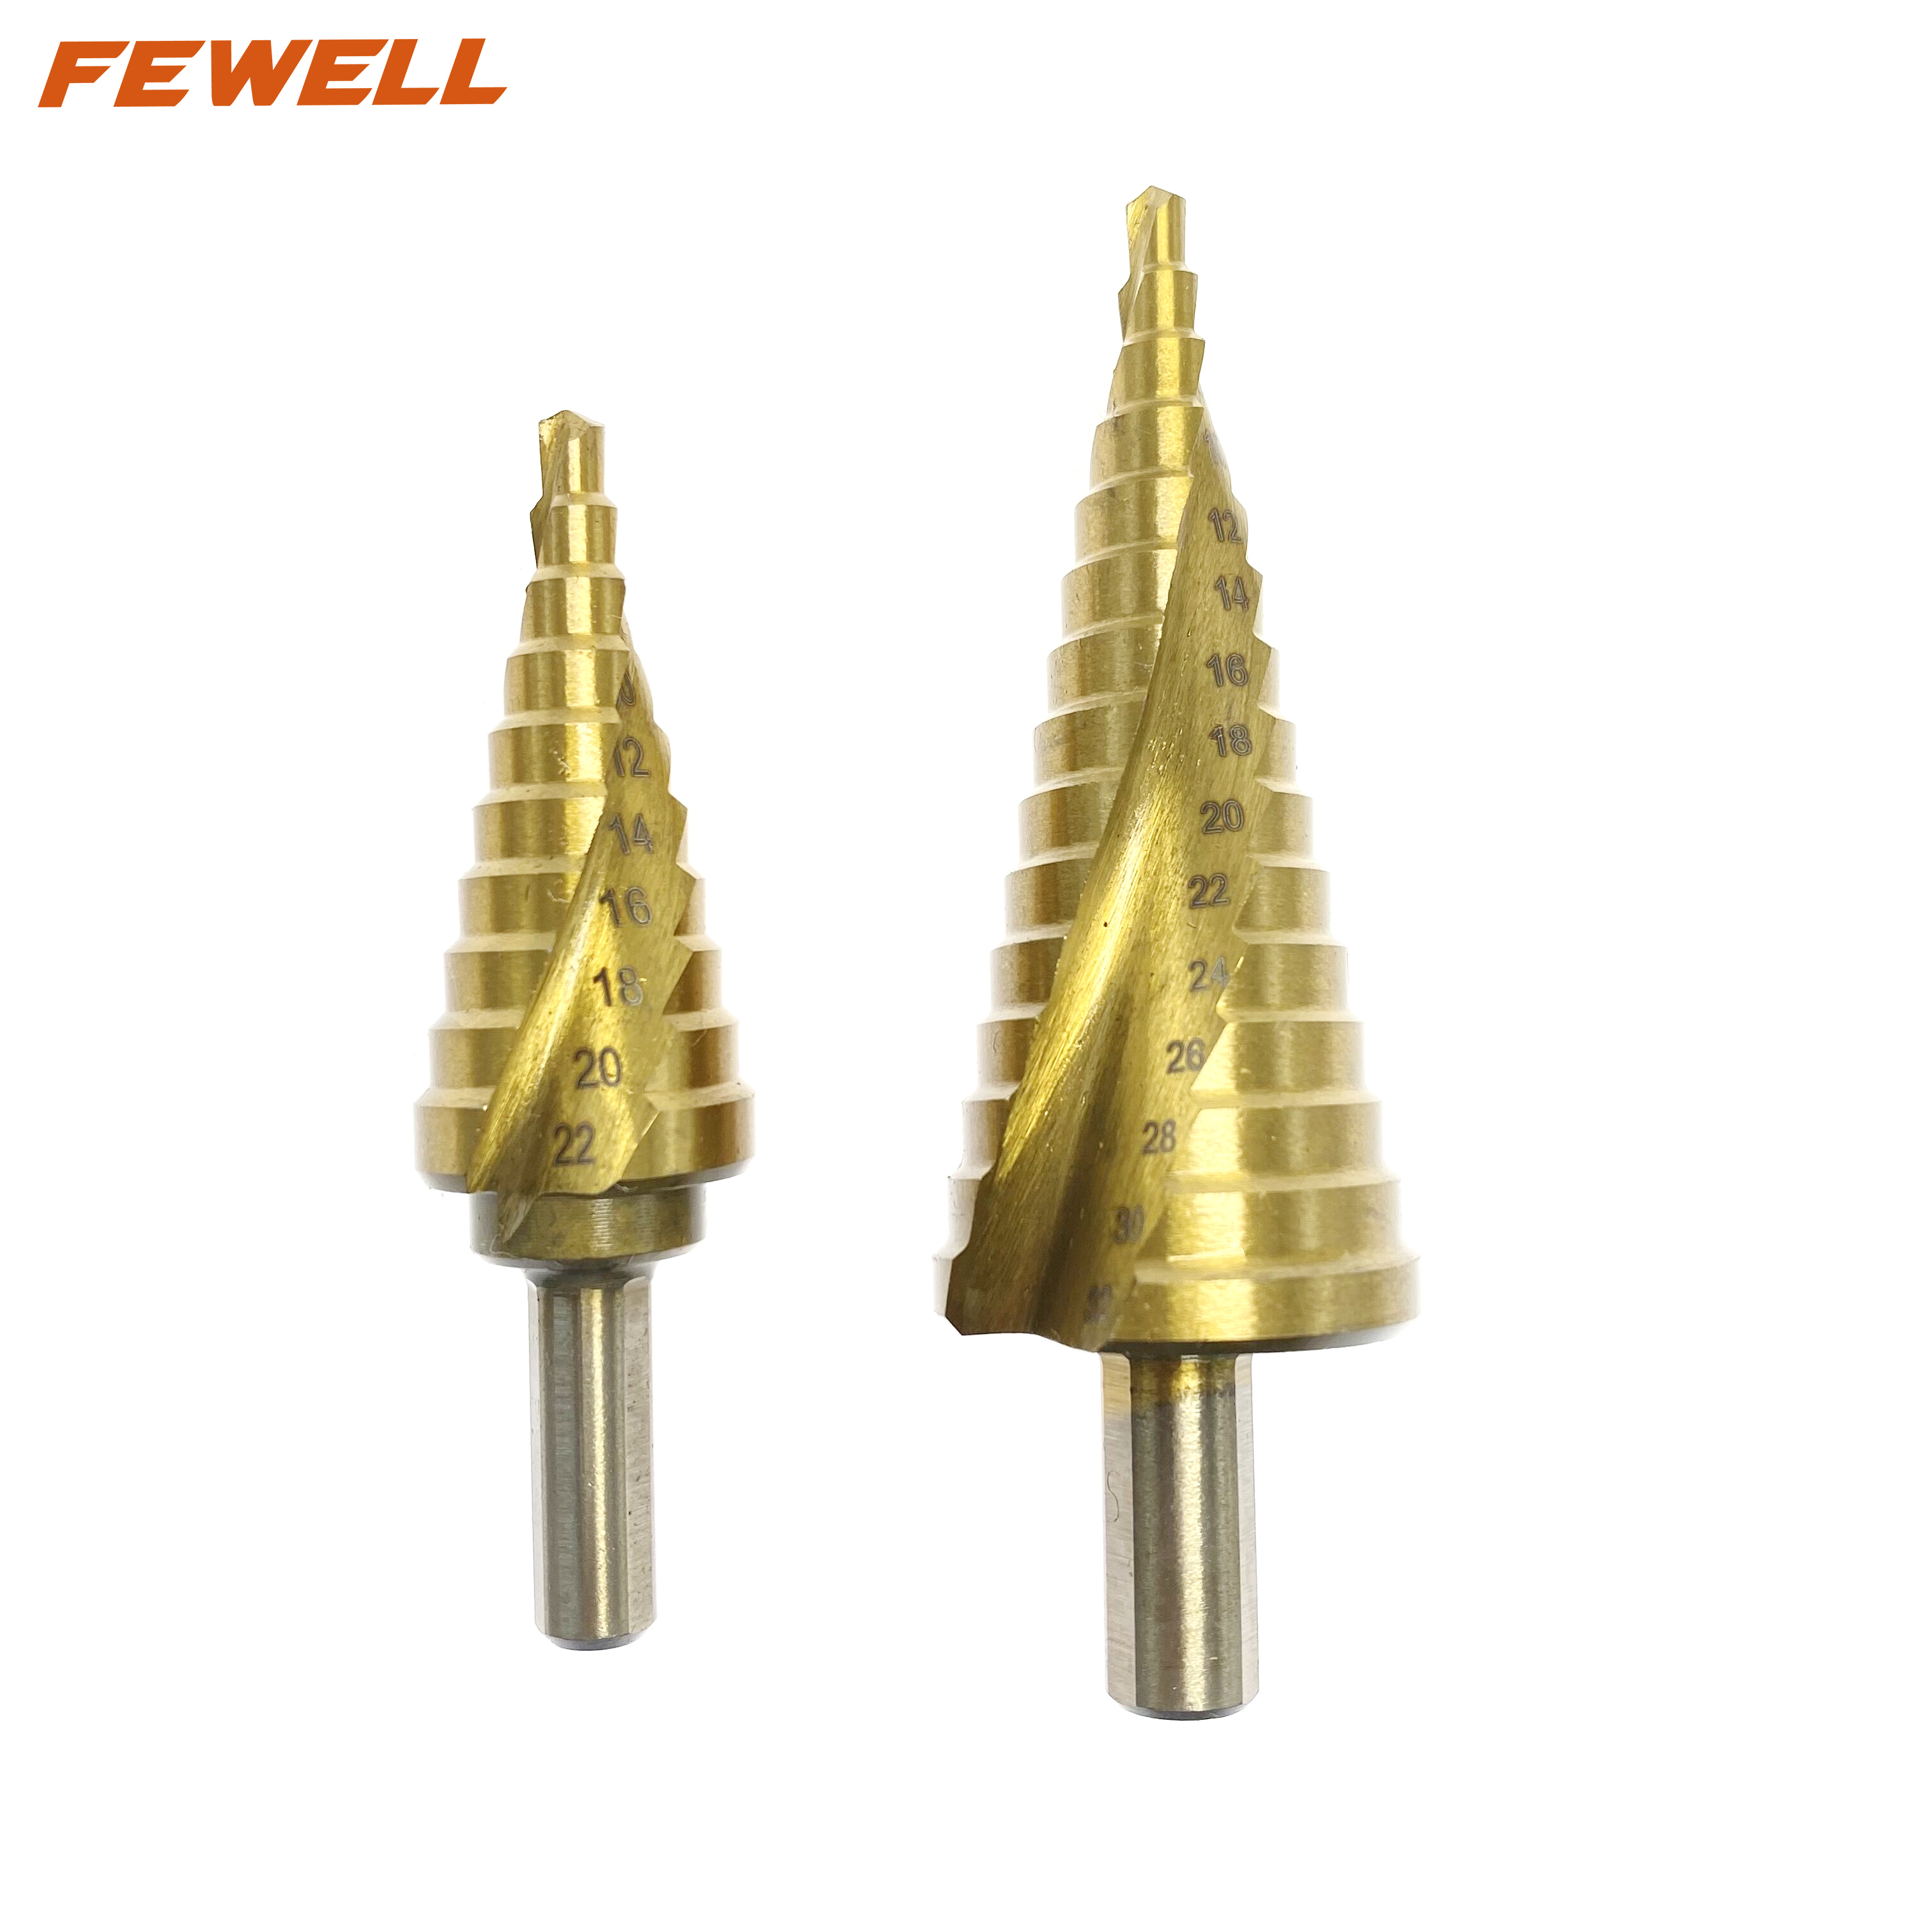 High quality Titanium coated 4241 HSS spiral flute step drill bit 4-22/32 mm for metal drilling